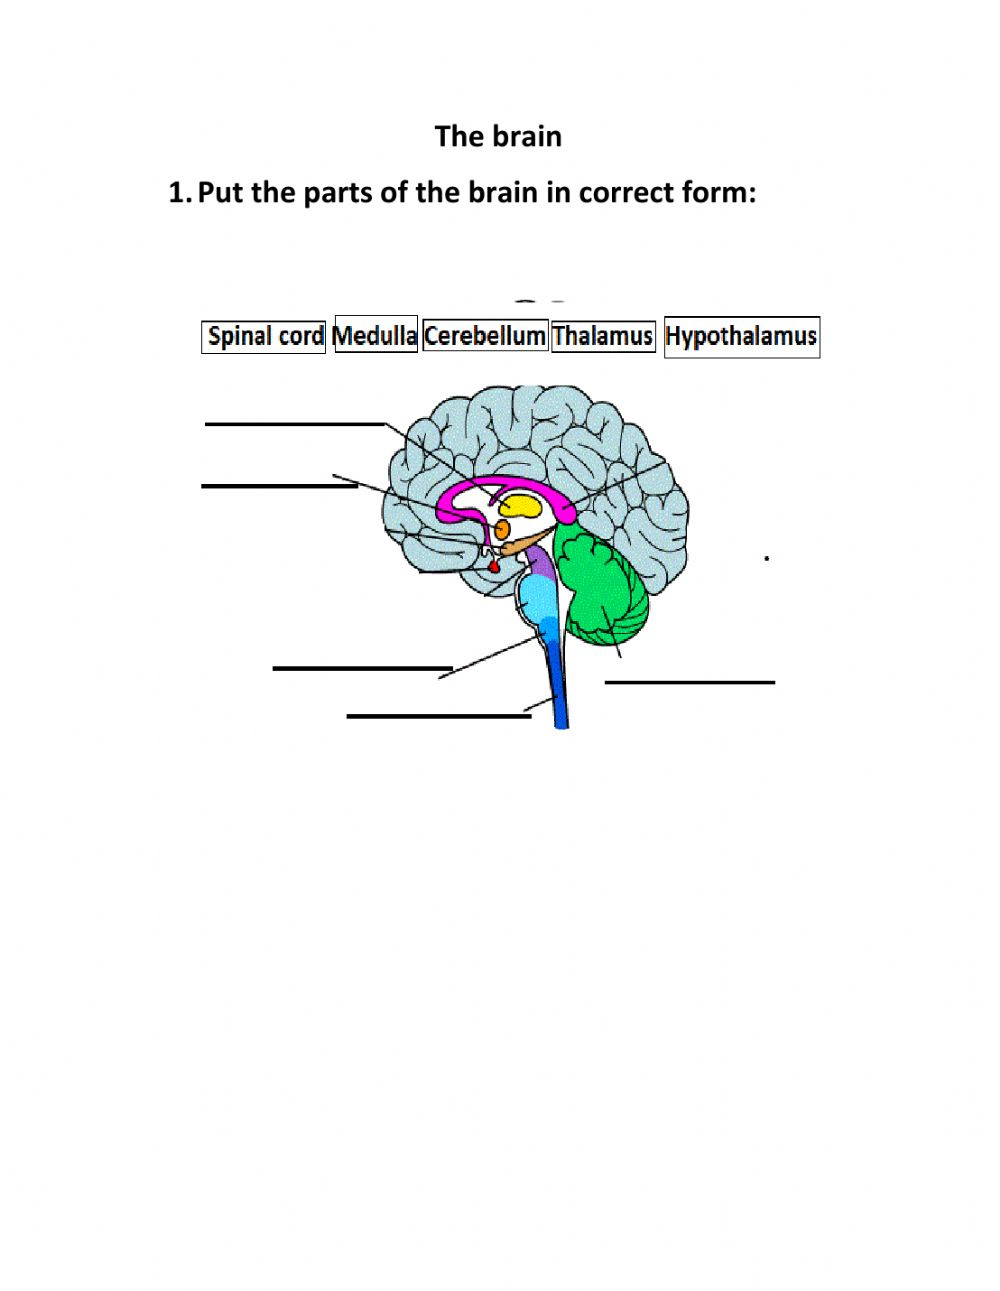 explain-the-different-structures-and-functions-of-the-brain-worksheet-edplace